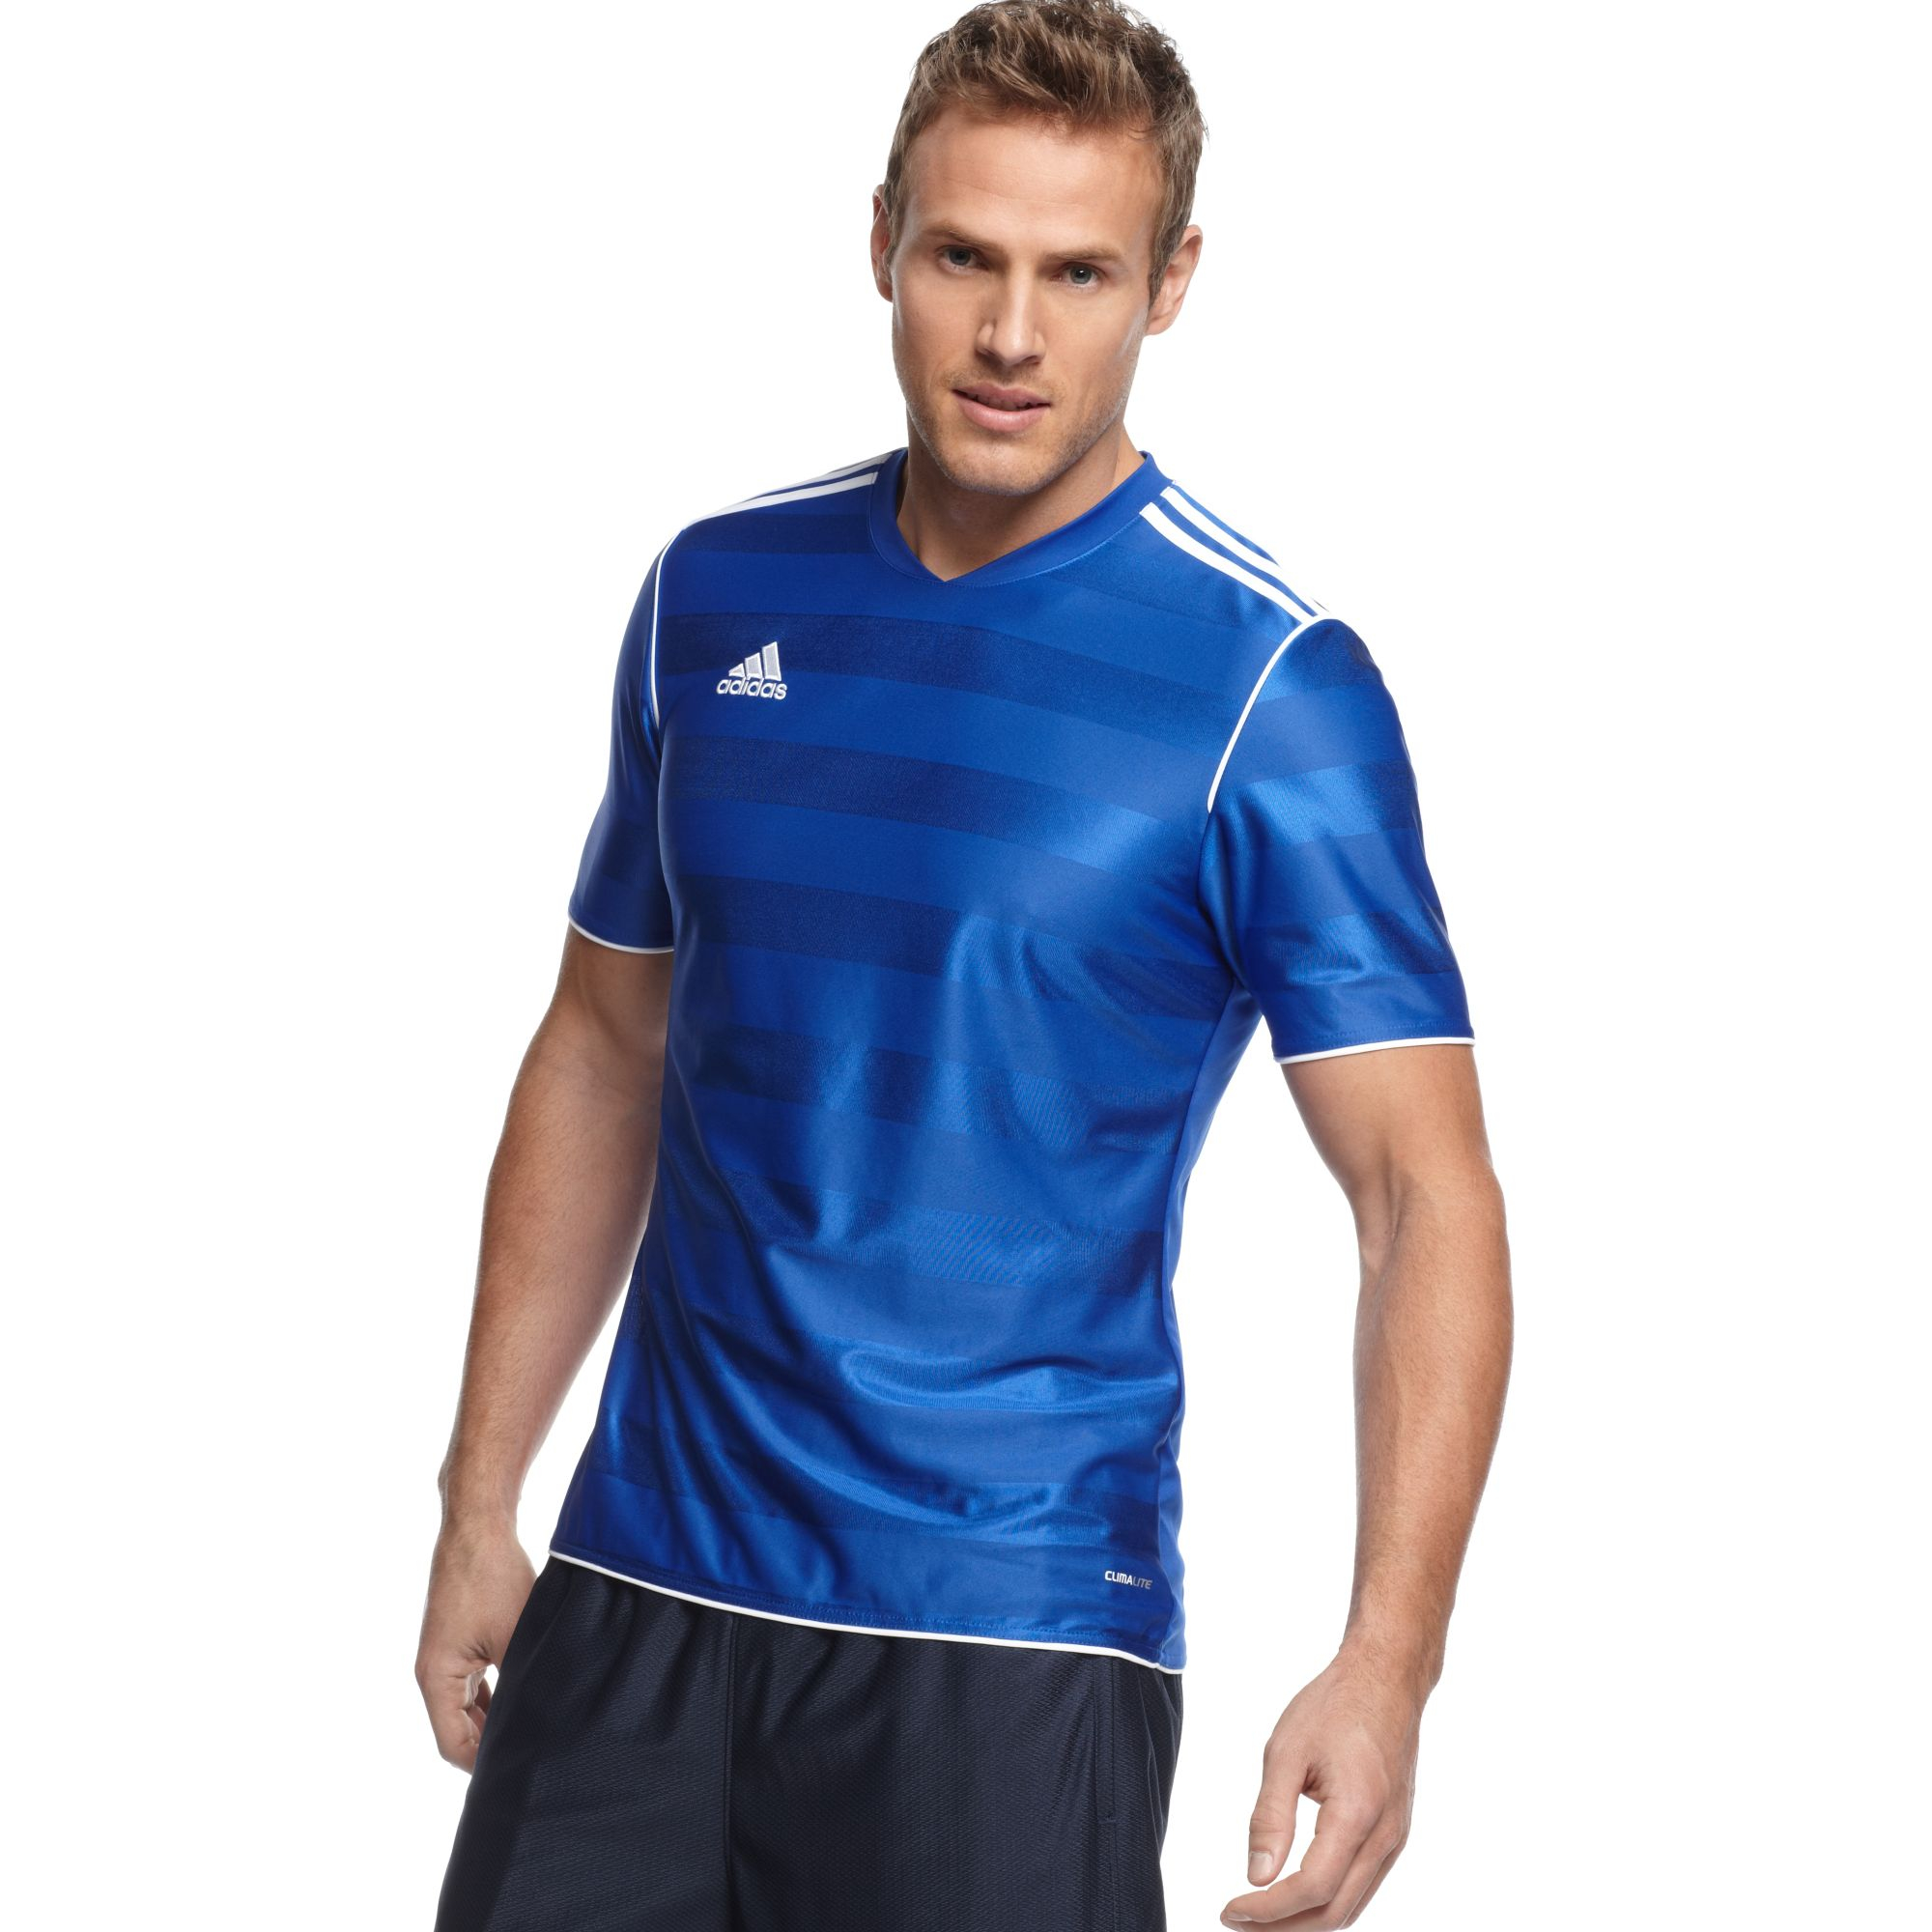 Lyst - adidas T Shirt Tabela 11 Climalite Soccer Jersey in Blue for Men